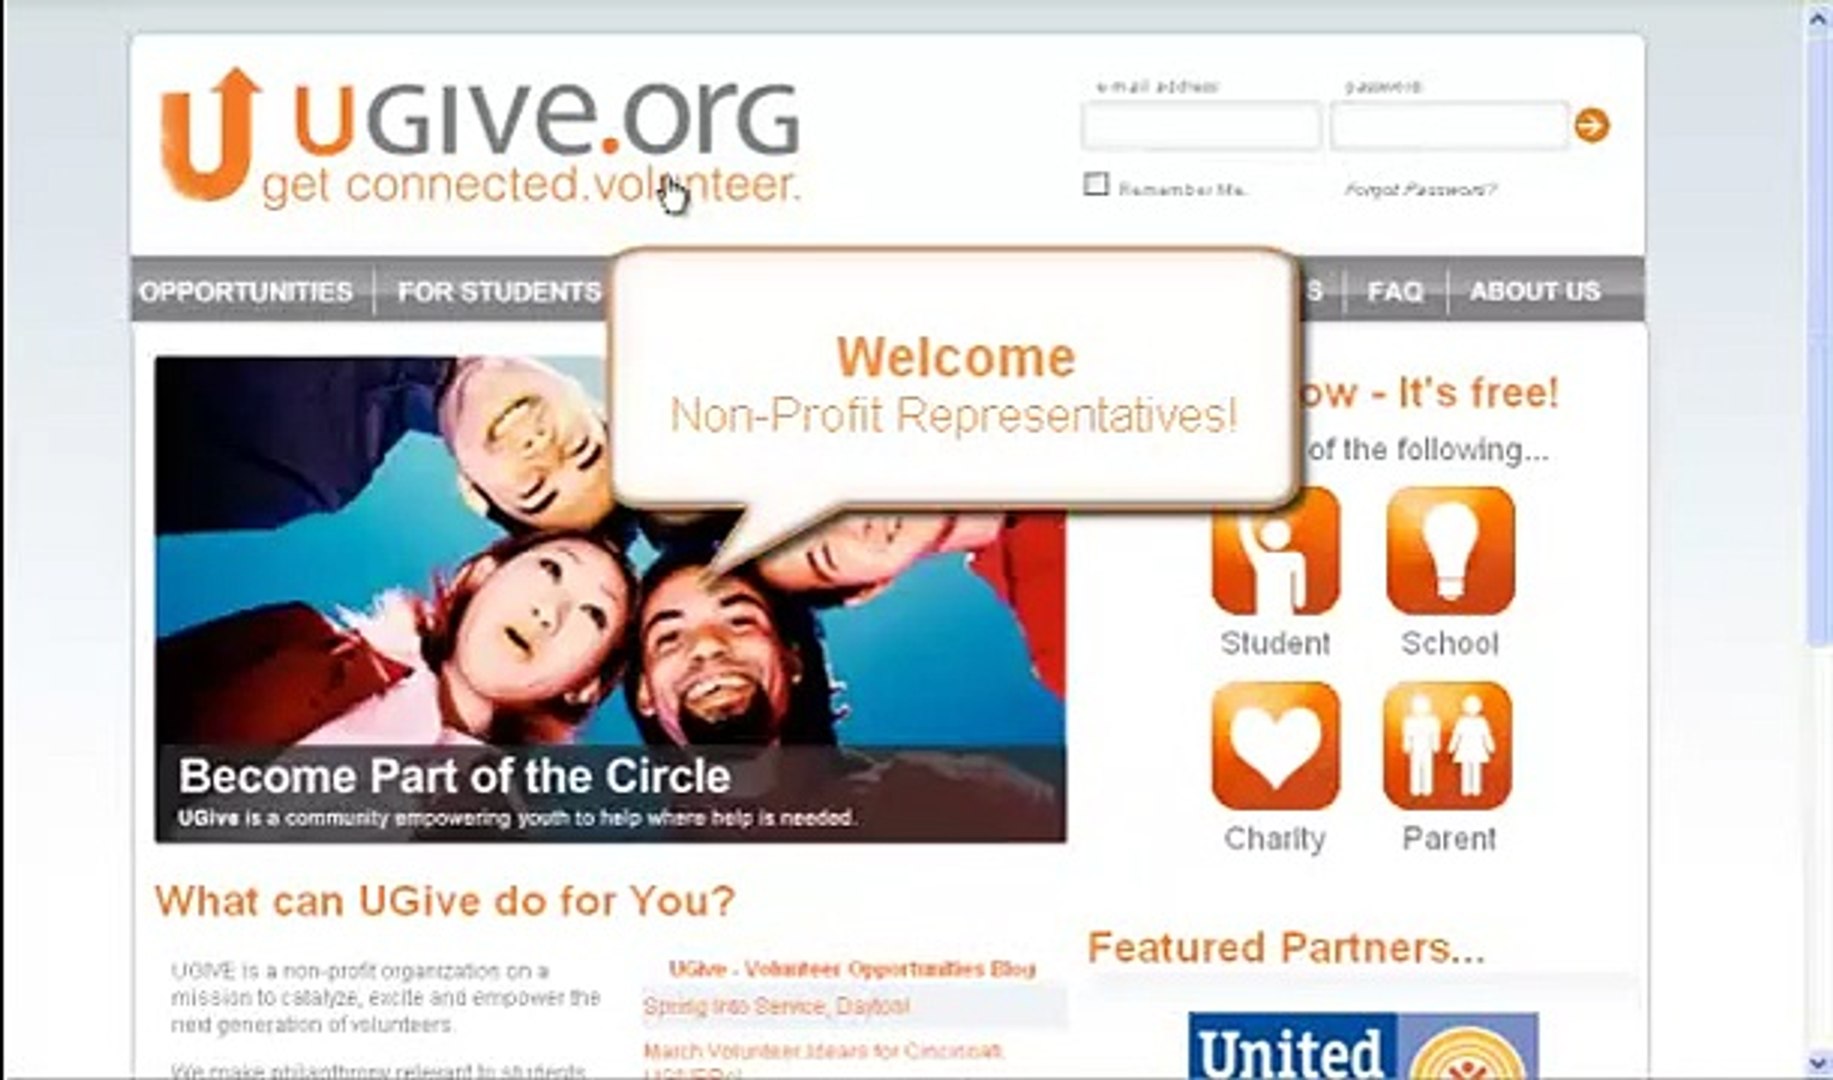 Non-profit organizations...Welcome to UGIVE!